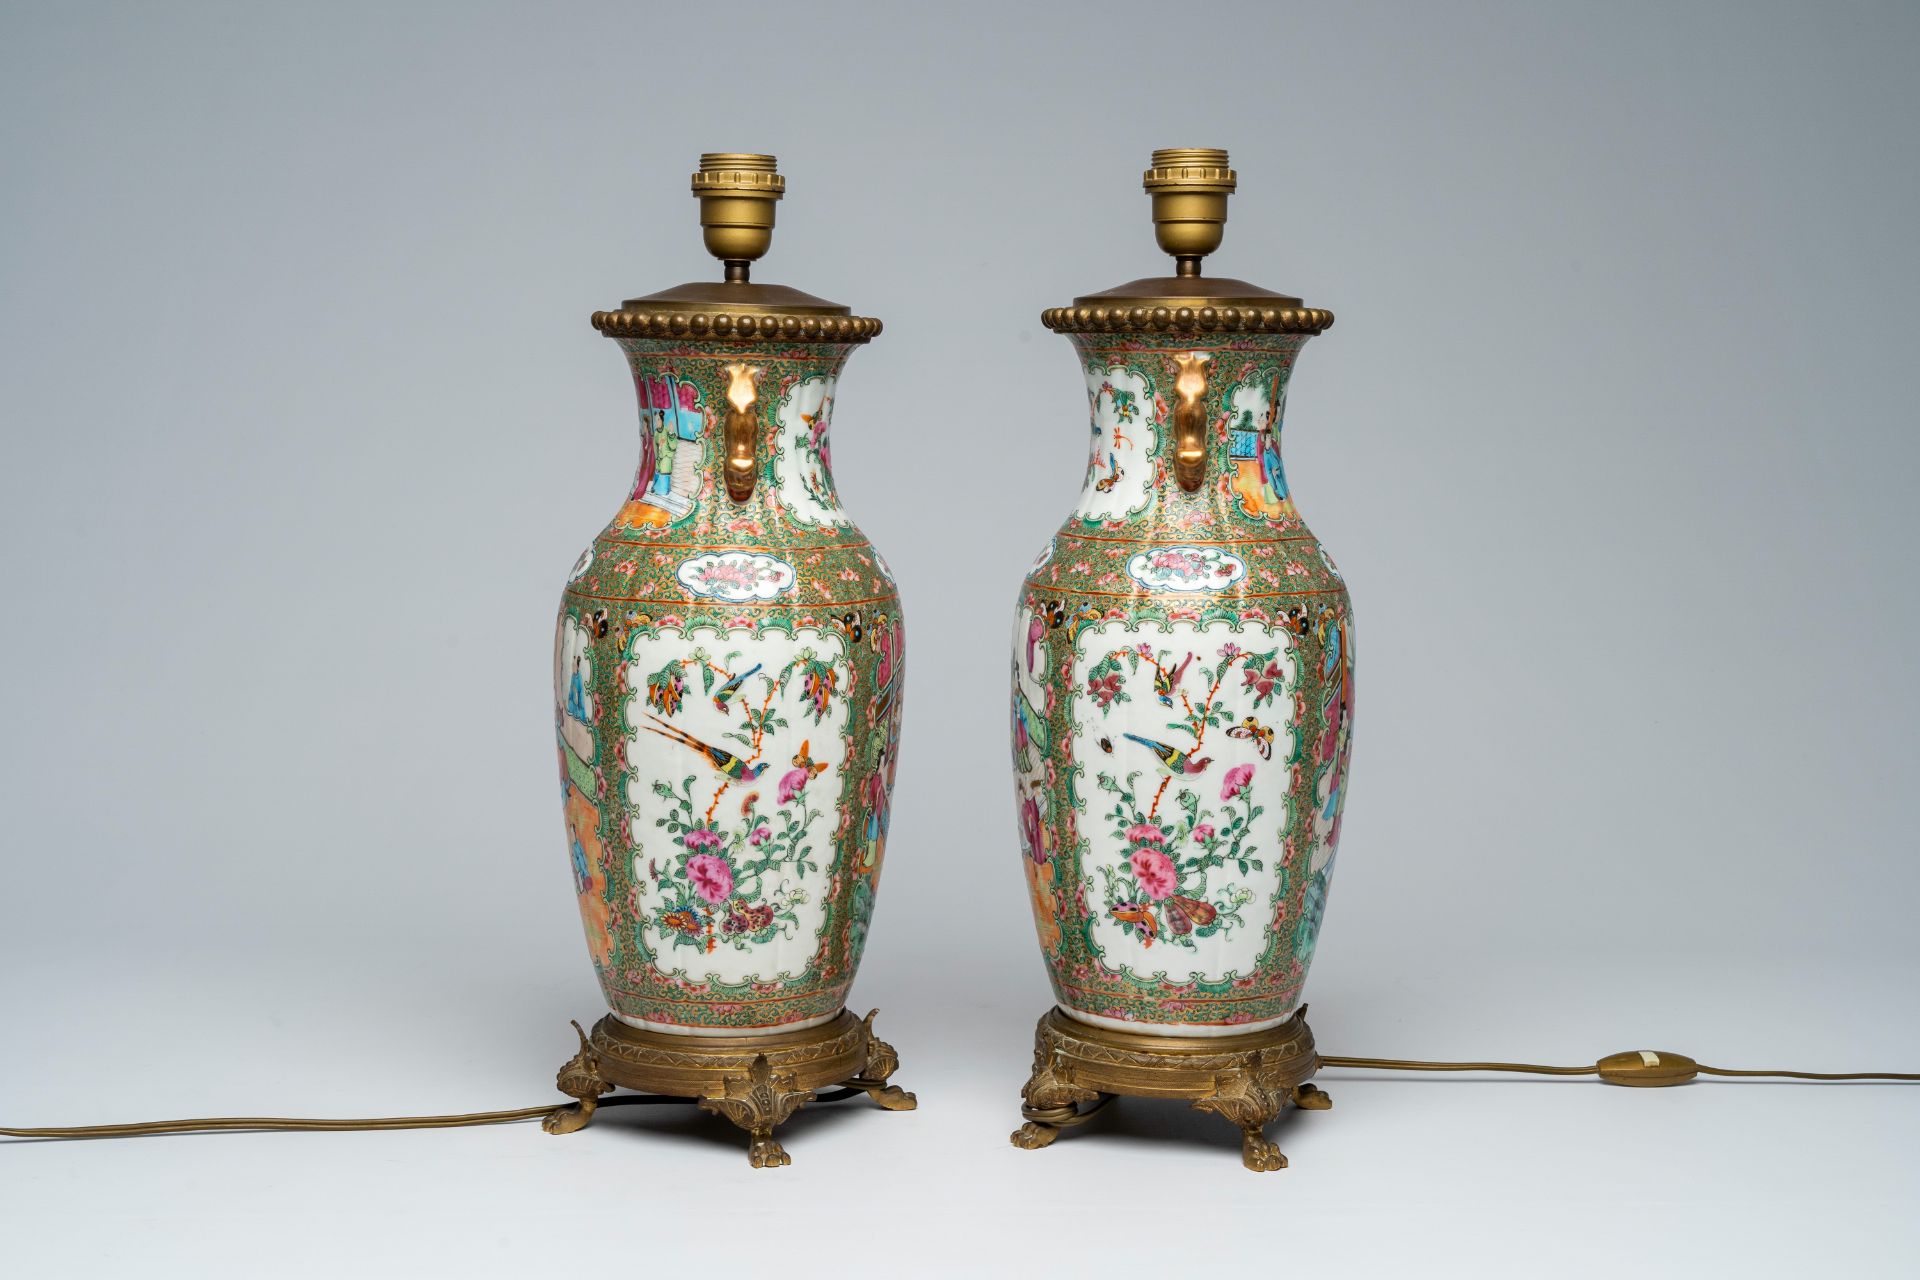 A pair of Chinese Canton famille rose vases with palace scenes mounted as lamps, 19th C. - Image 5 of 7